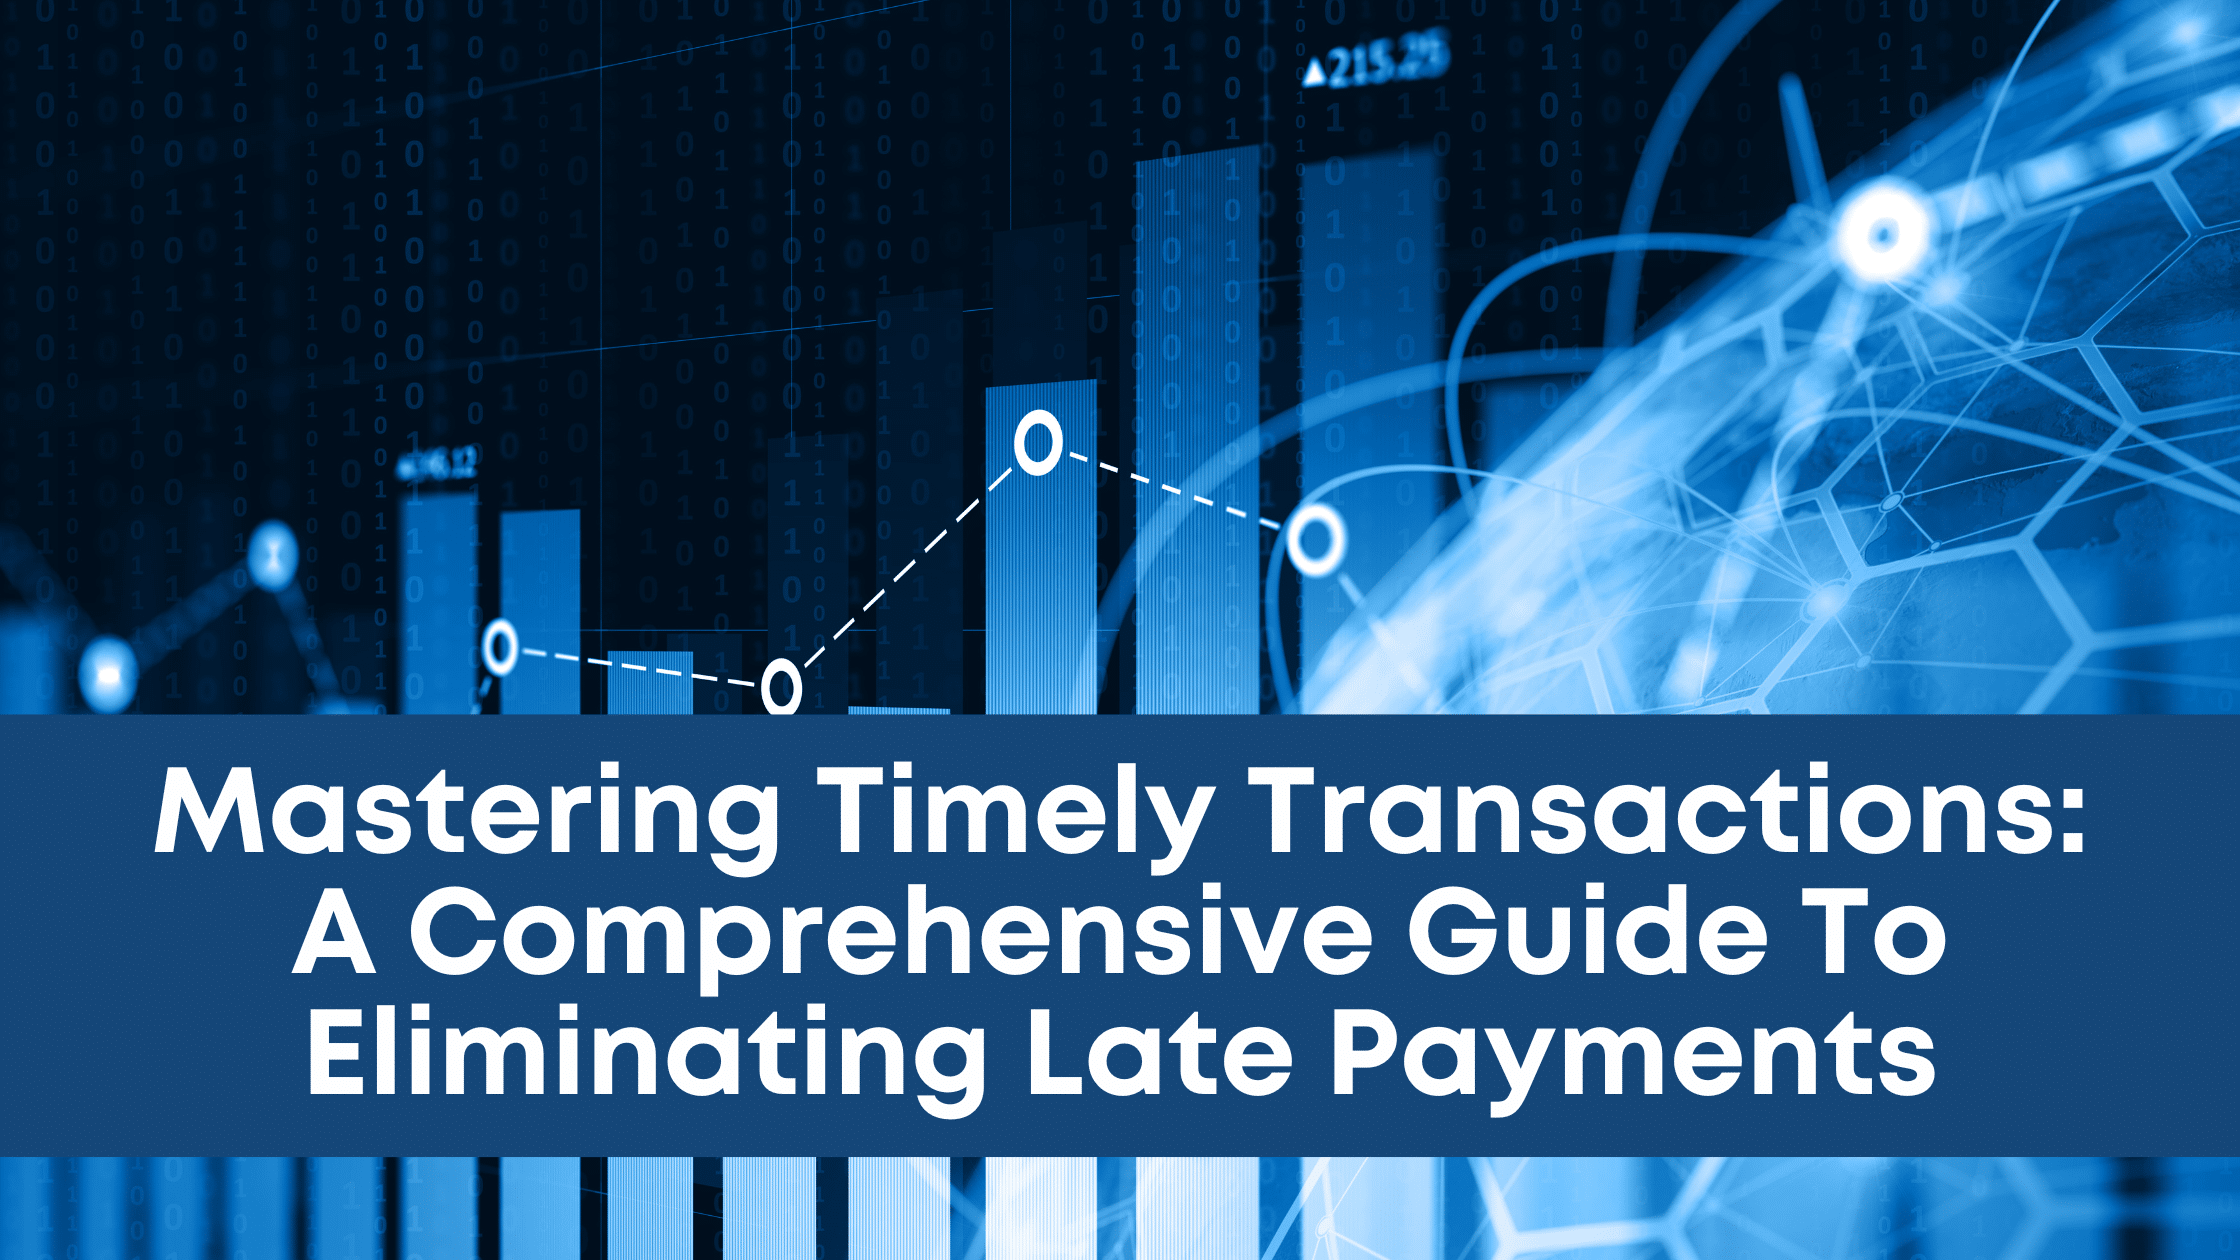 Mastering Timely Transactions: A Comprehensive Guide To Eliminating Late Payments